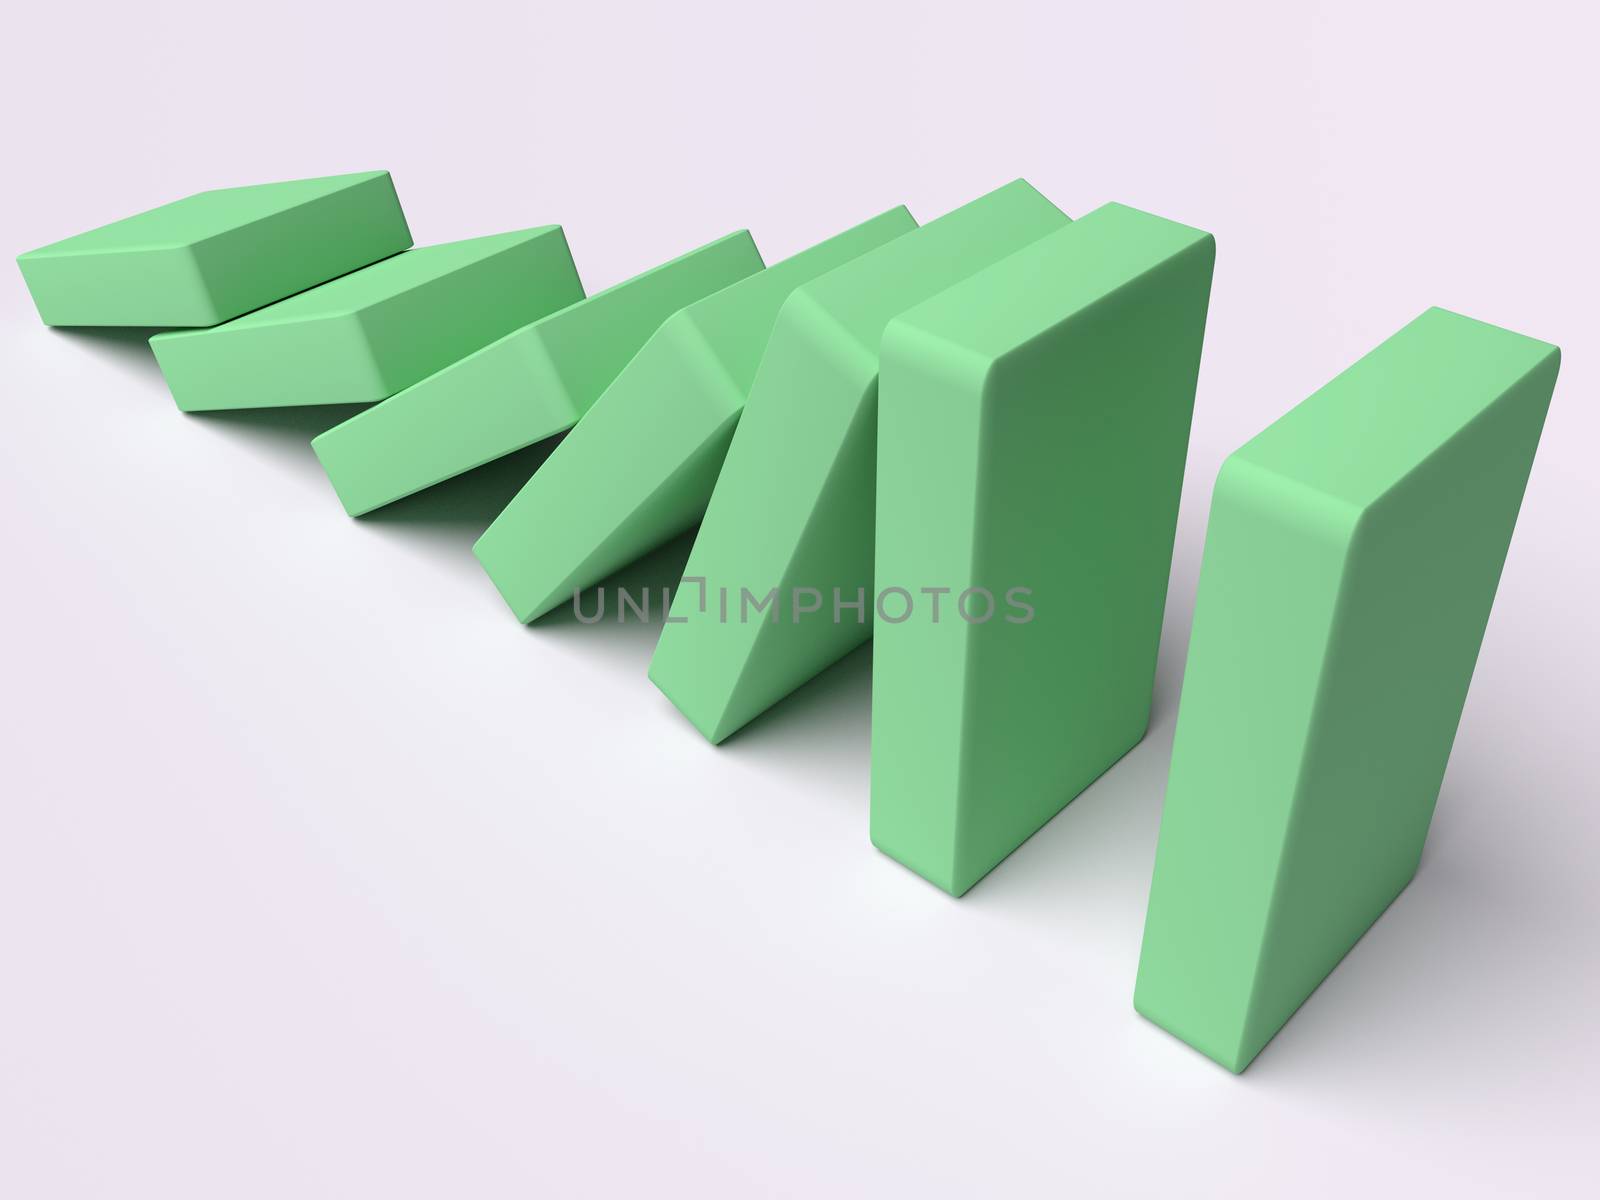 Conceptual illustration of falling bricks which push each other